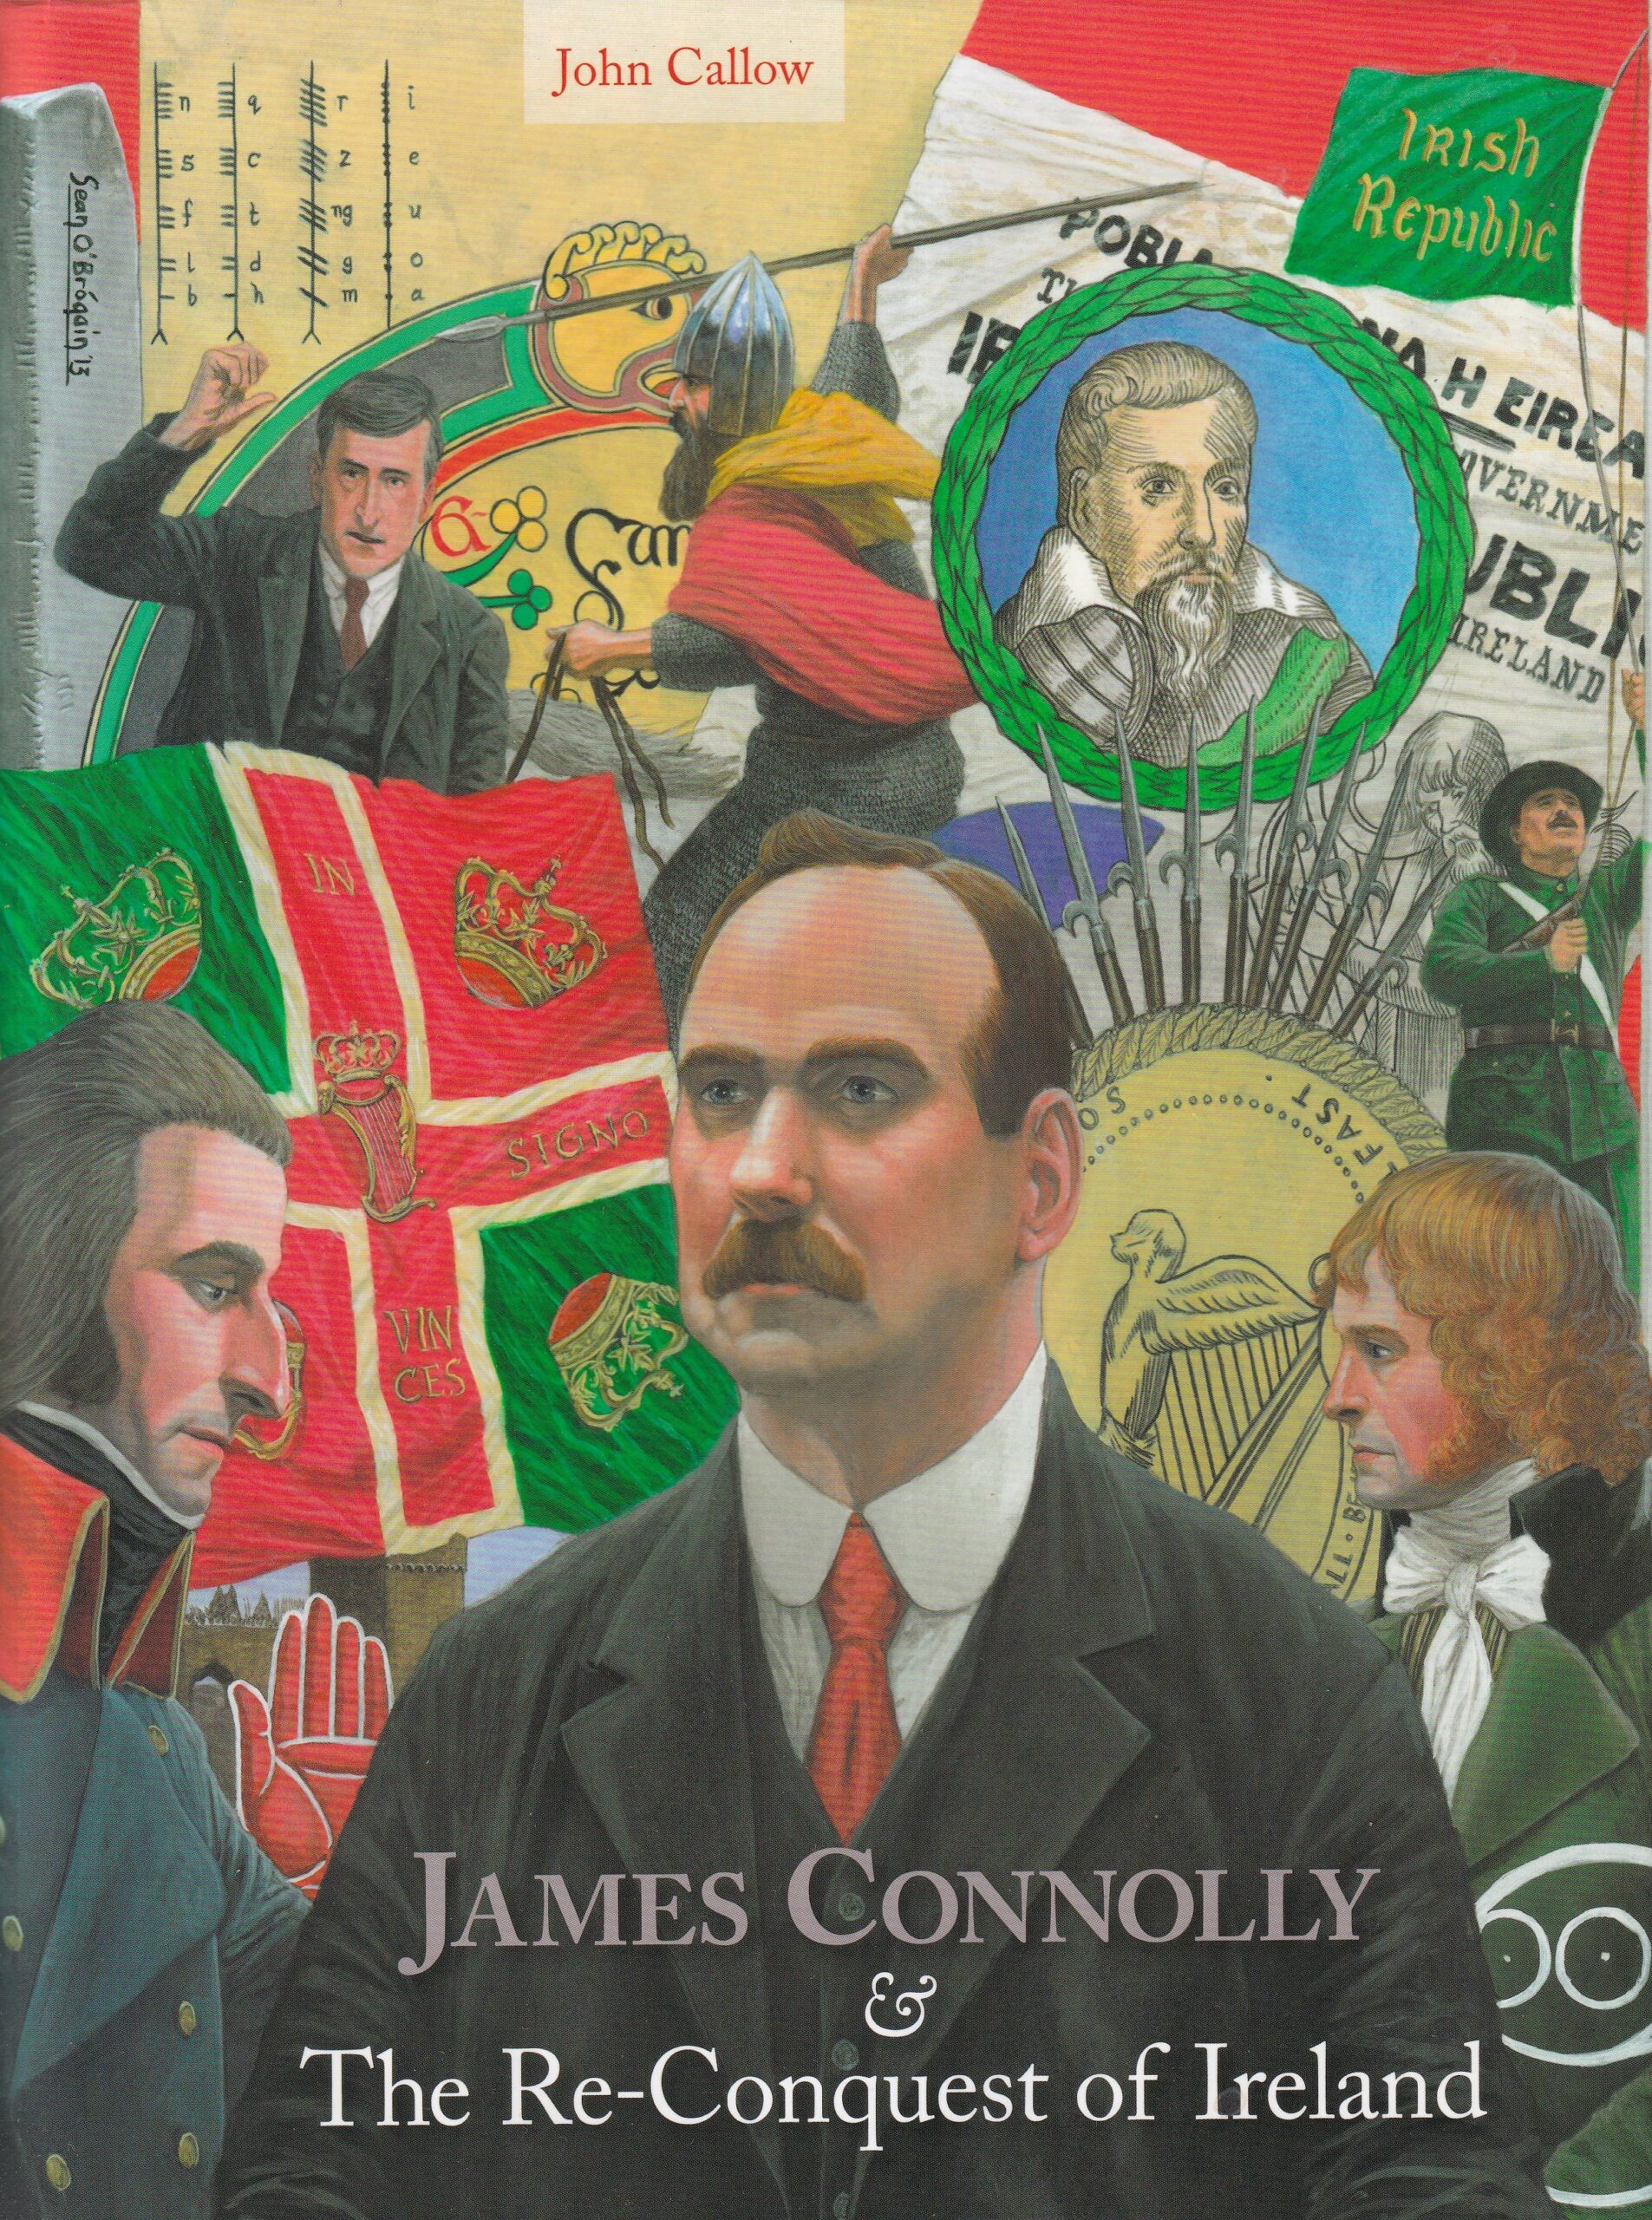 James Connolly and the Re-Conquest of Ireland by John Callow